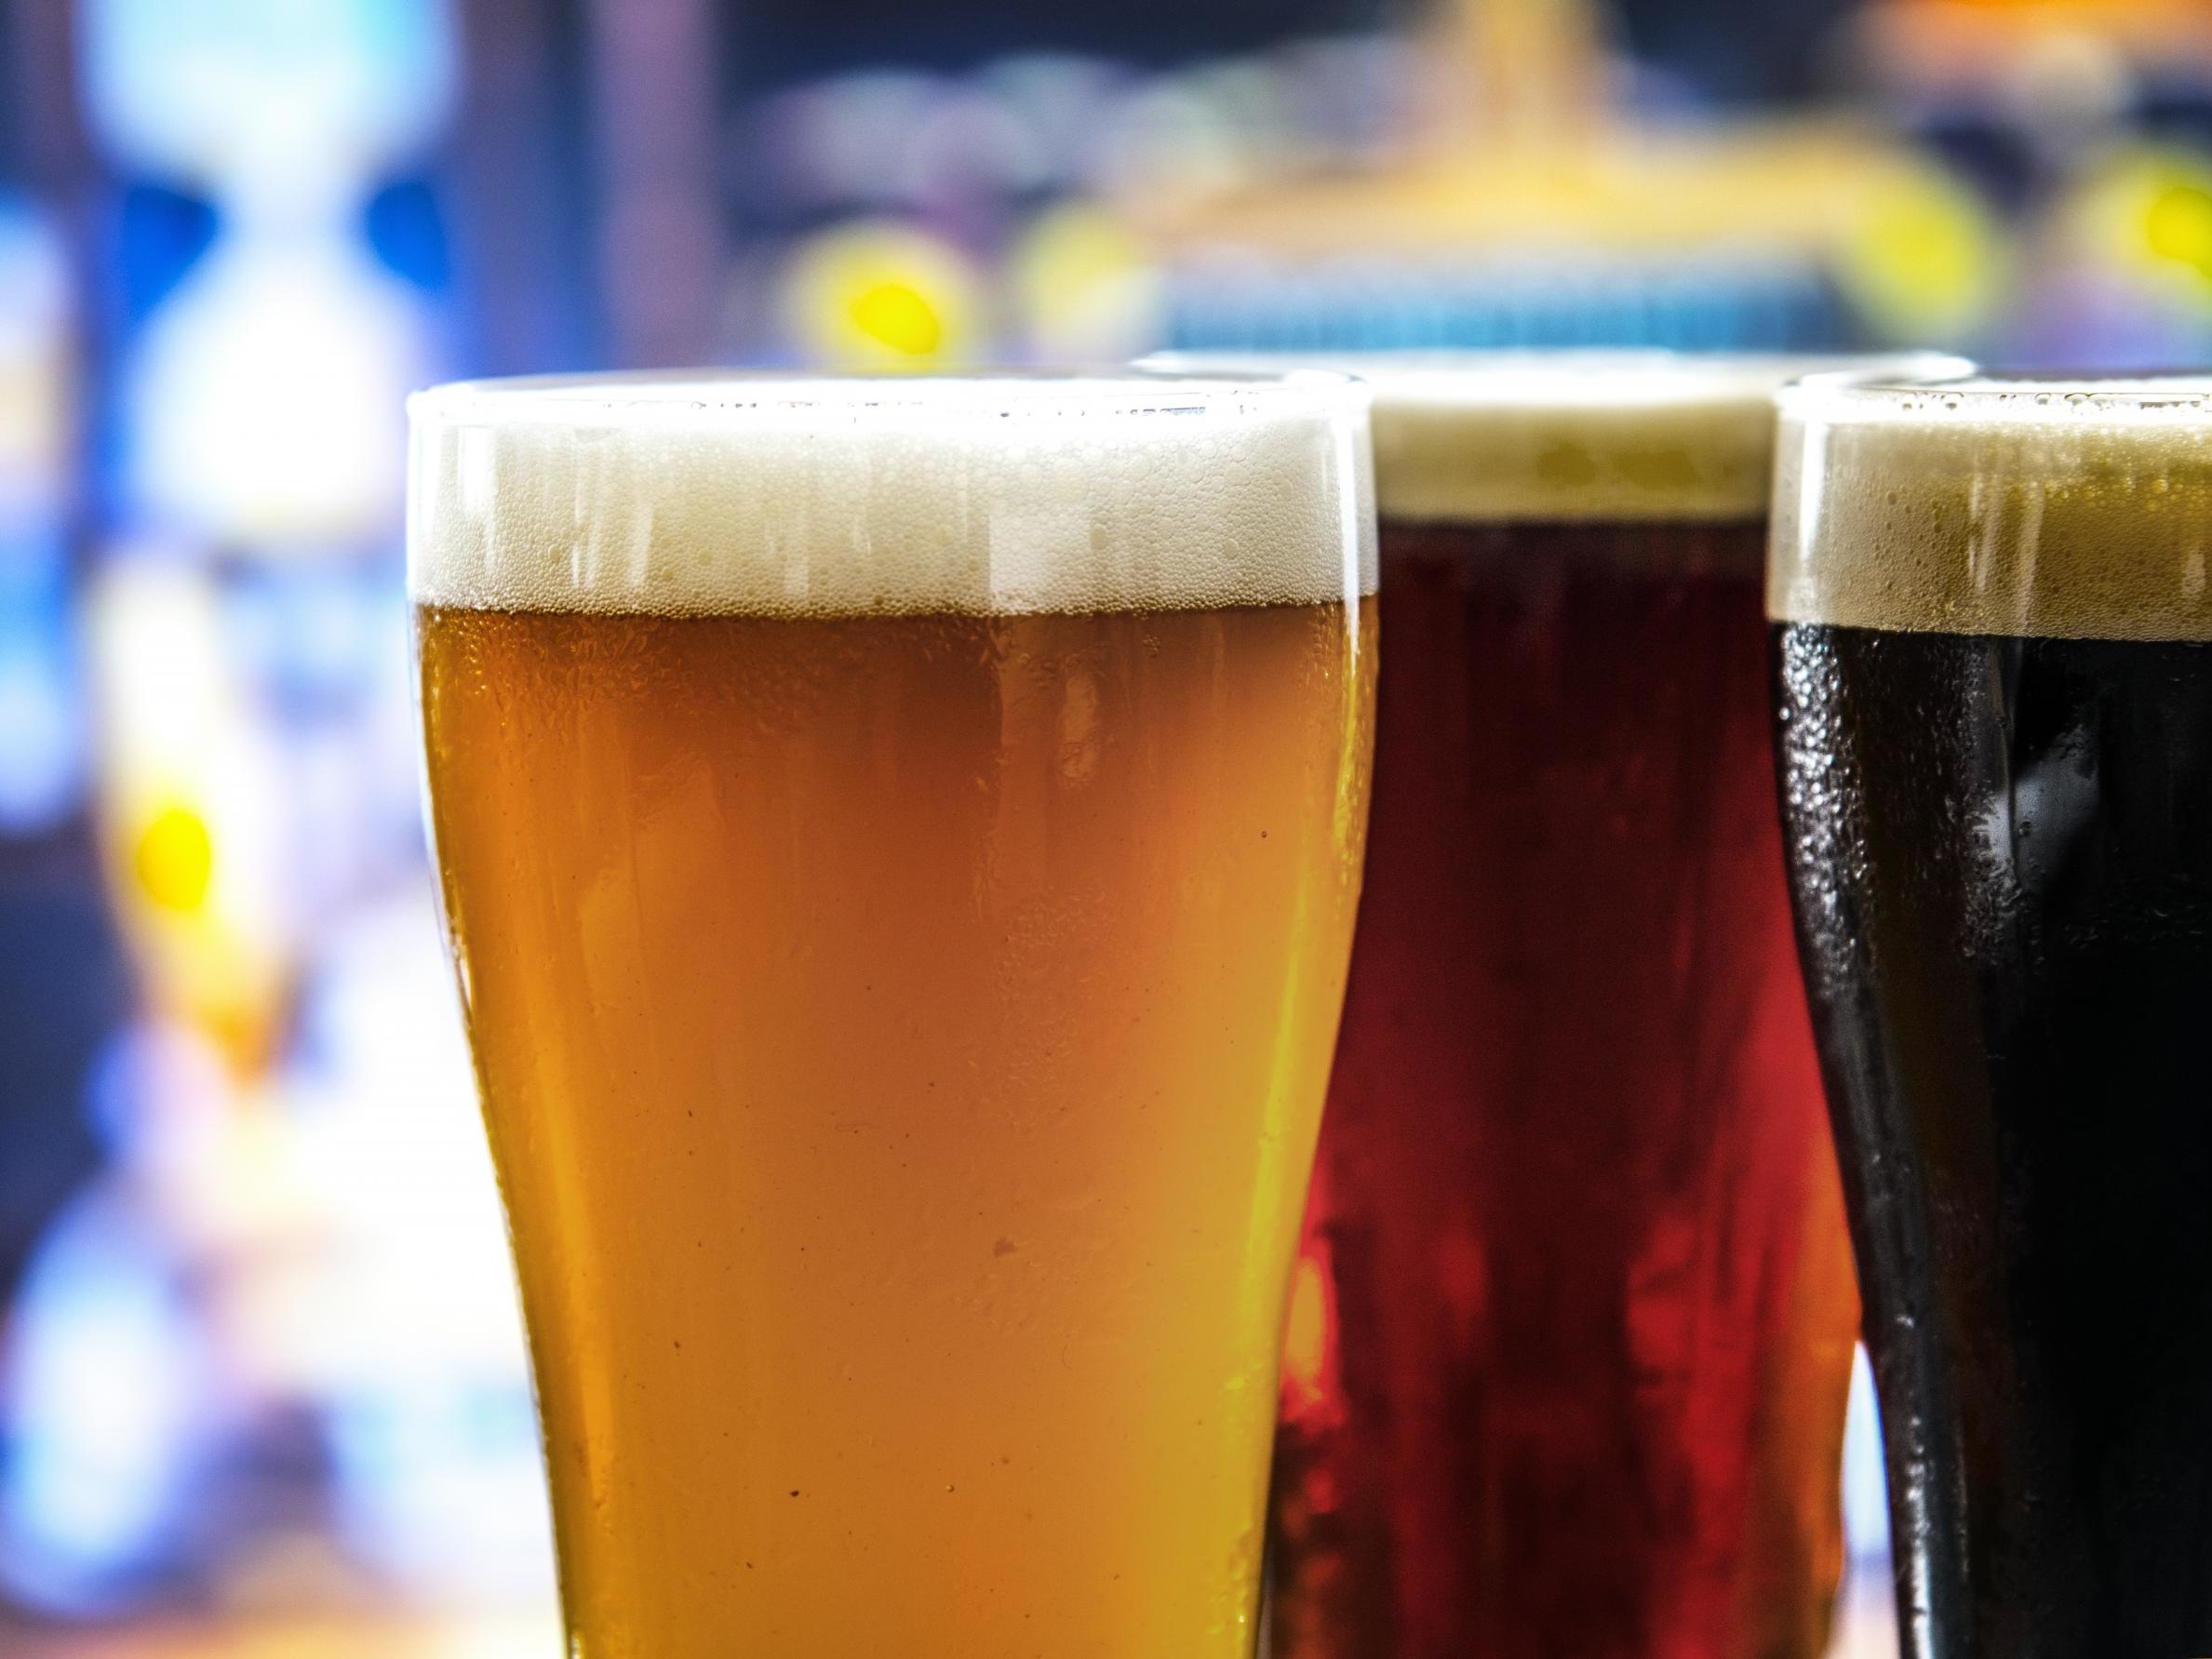 Alcohol levels in overripe fruit can be as high as in beer